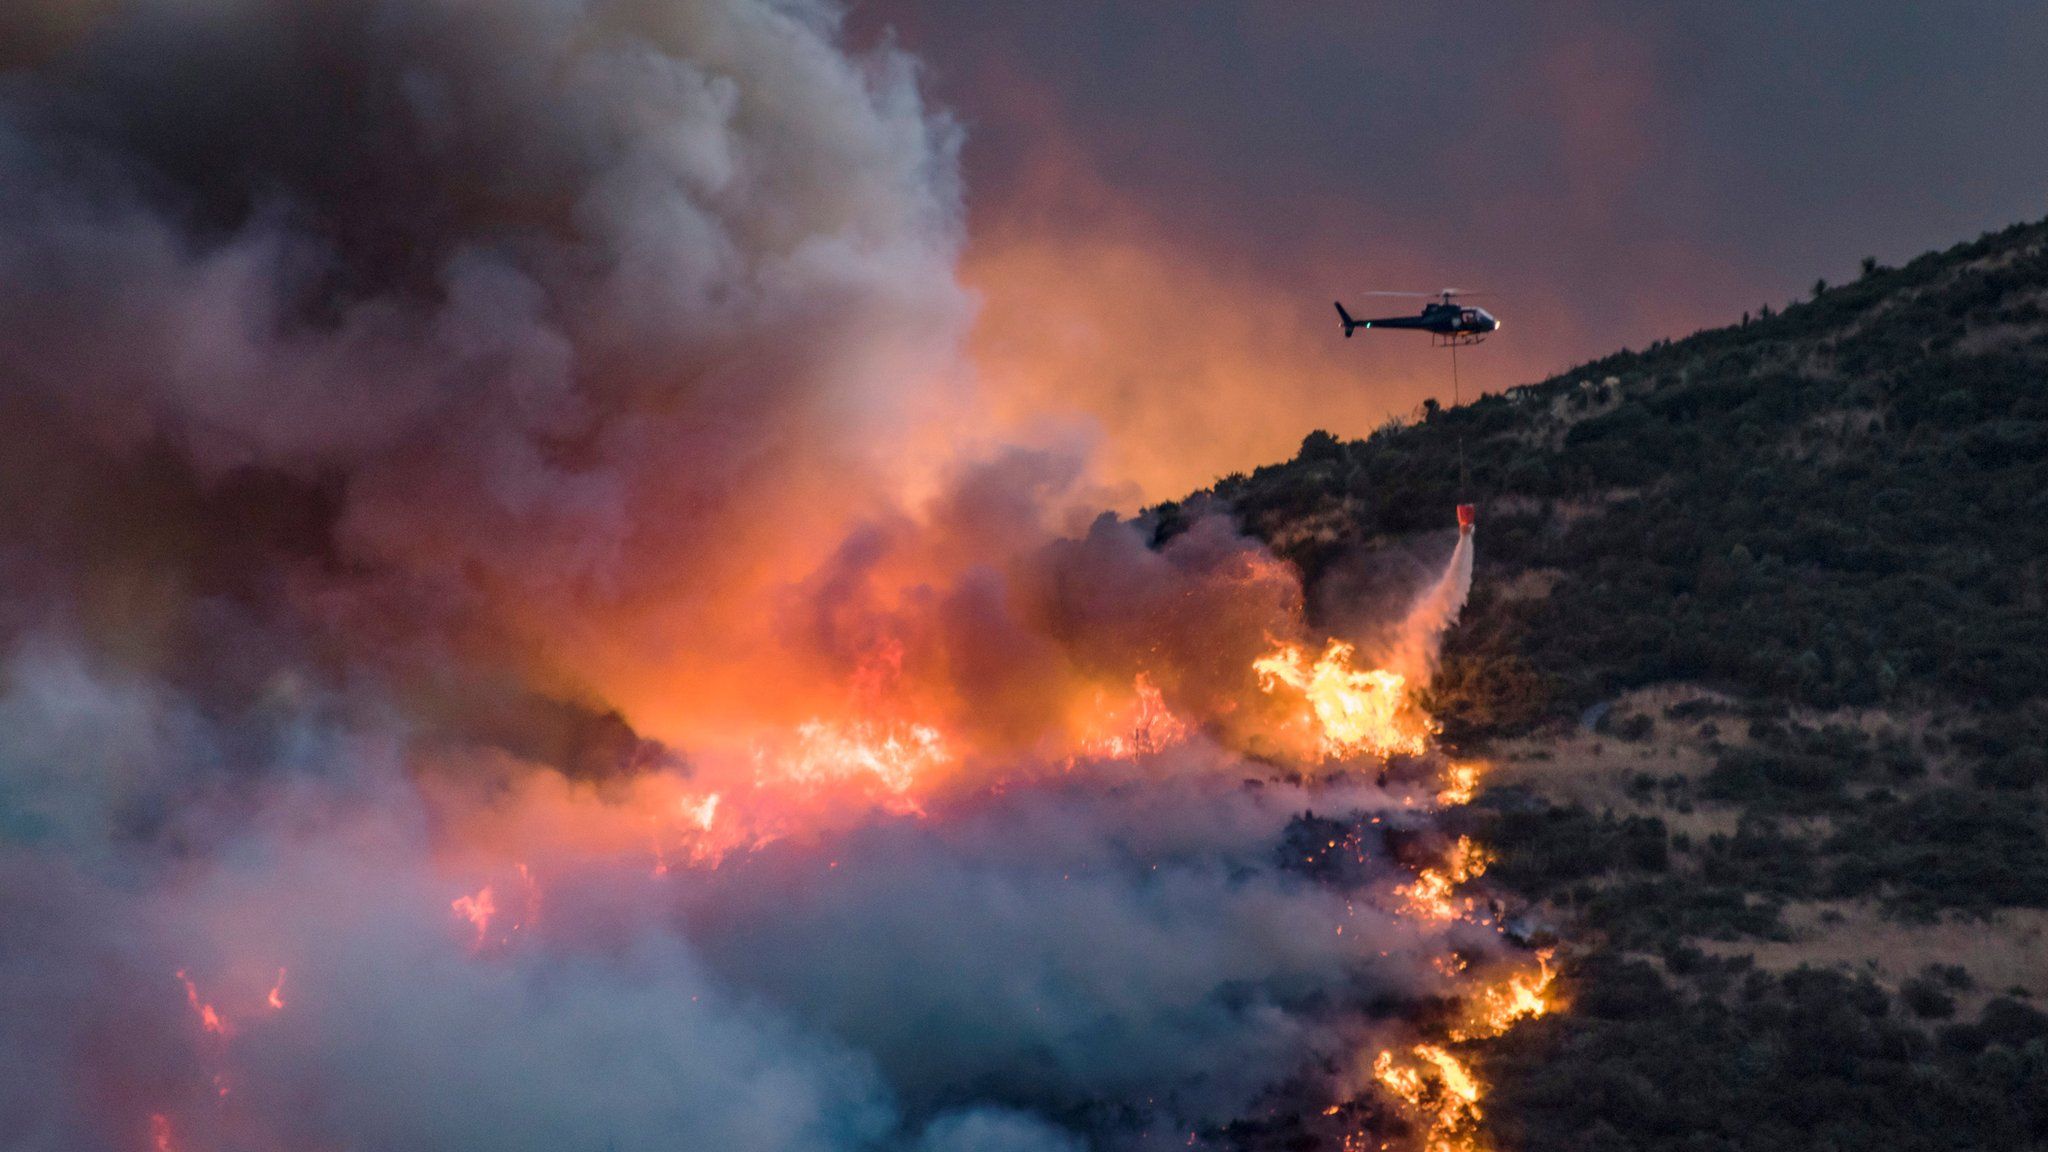 A helicopter dumps fire retardant on wildfires near Christchurch on New Zealand's South Island, 13 February 2017